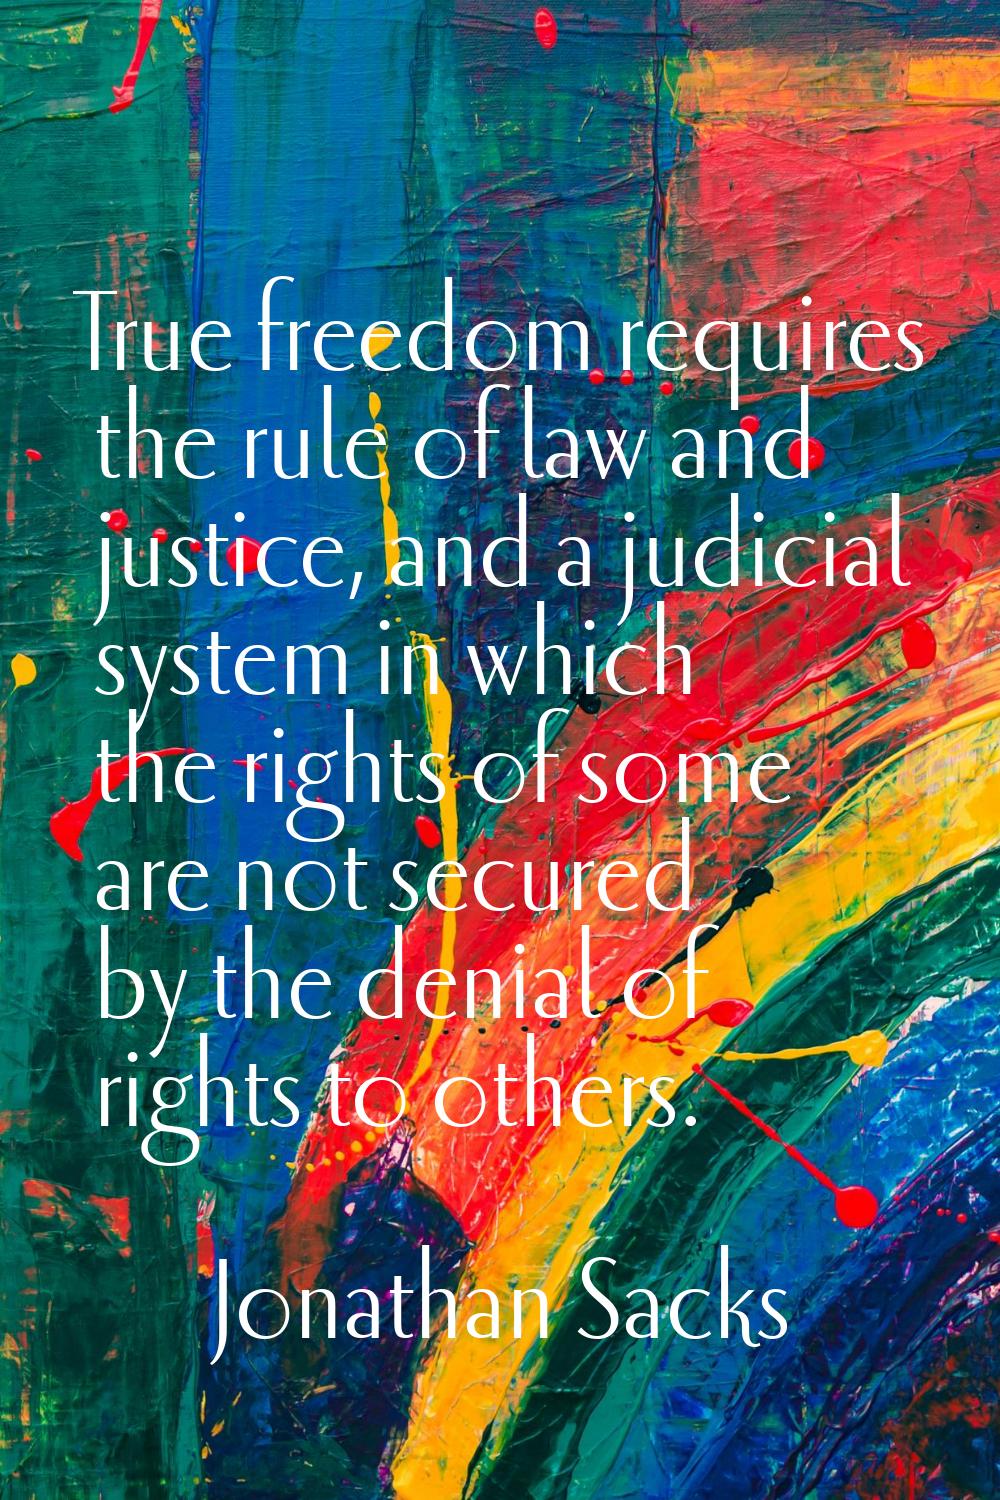 True freedom requires the rule of law and justice, and a judicial system in which the rights of som